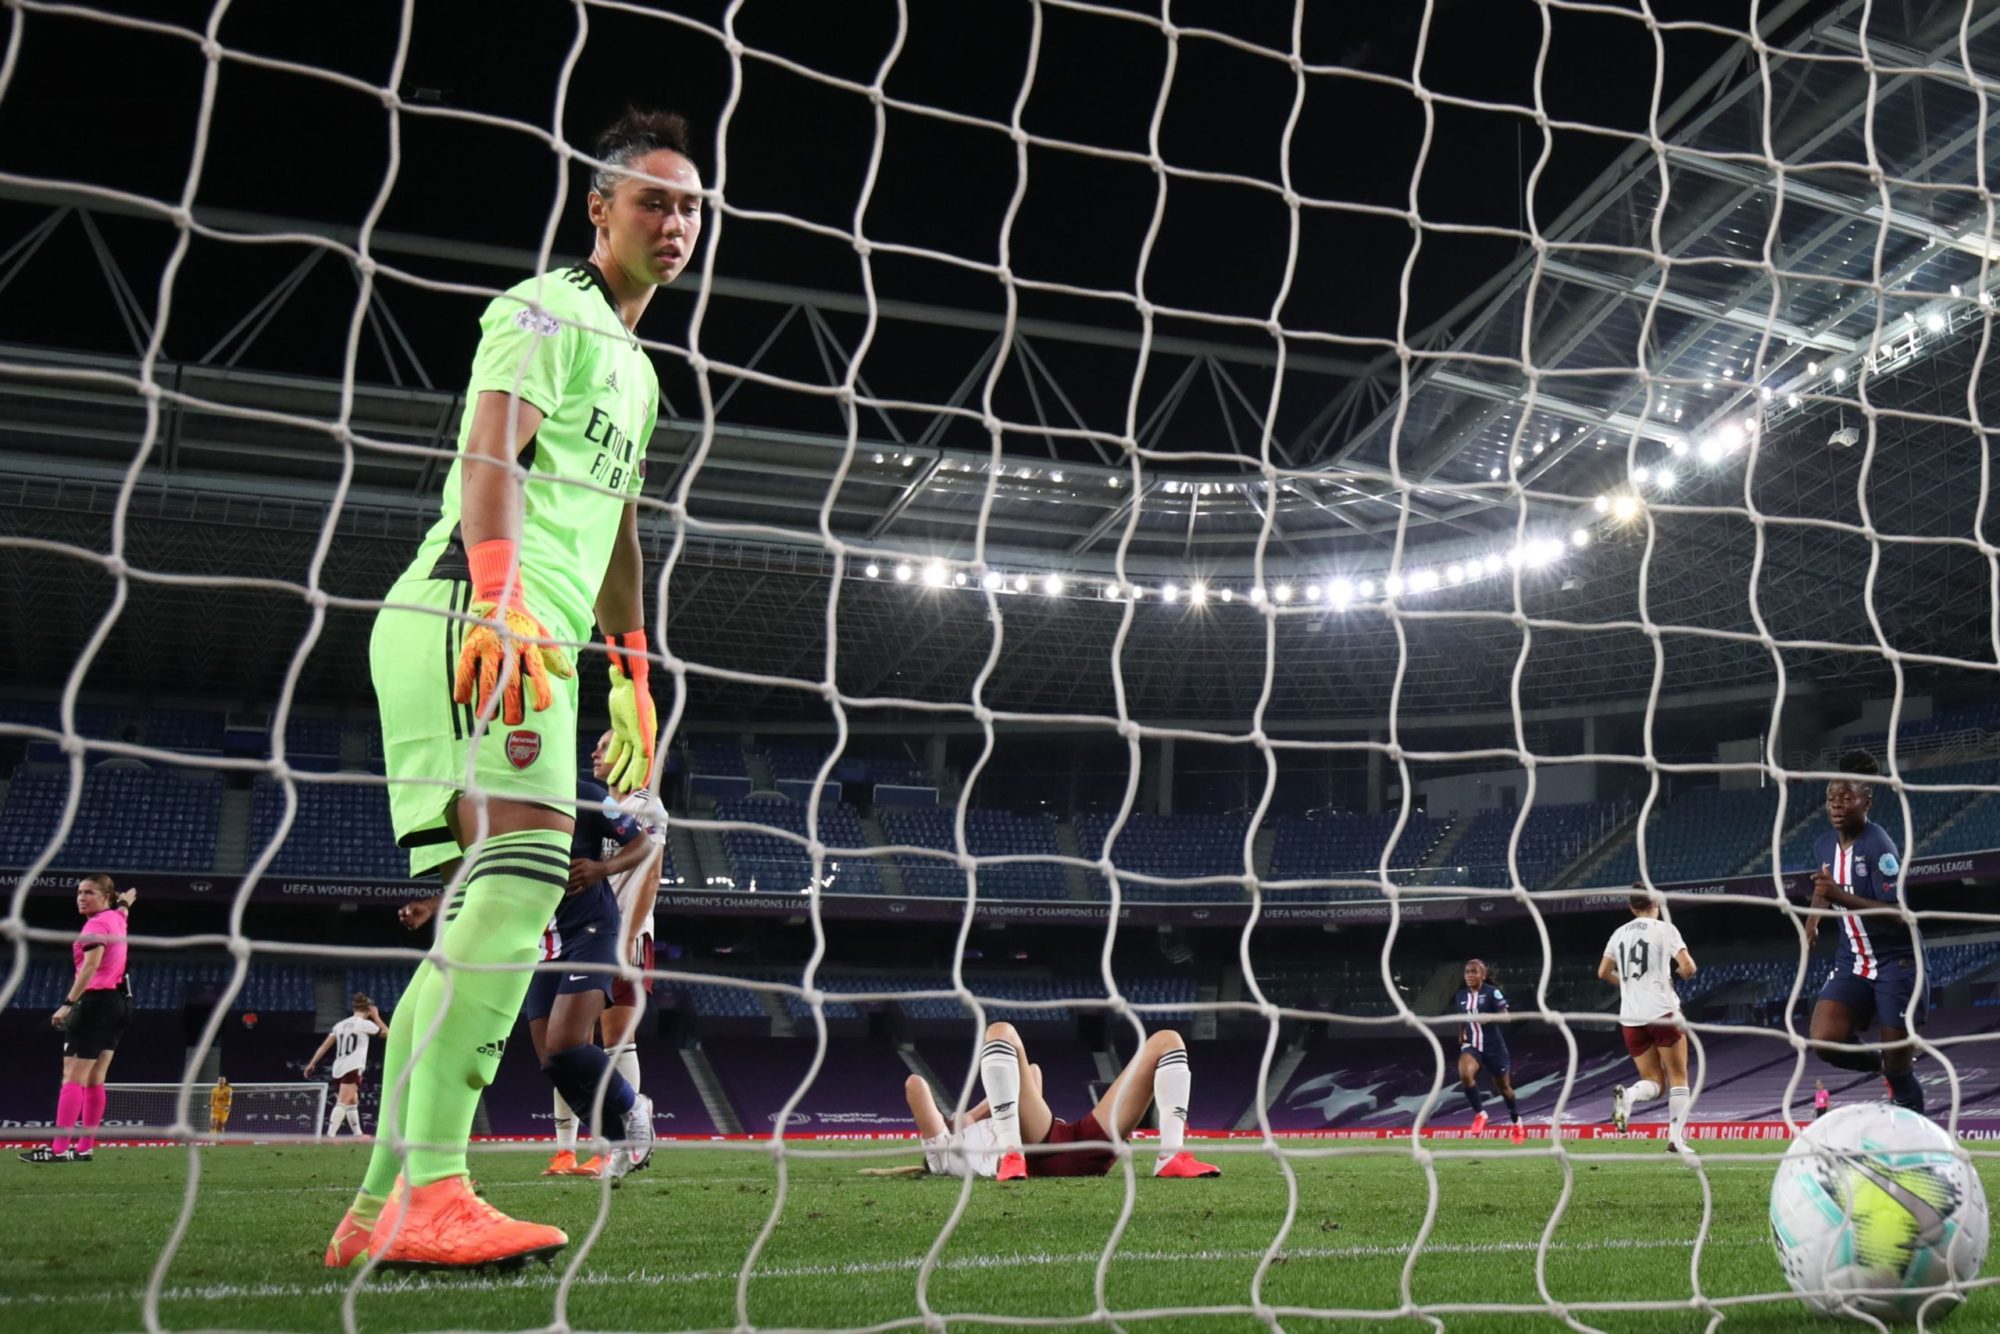 Arsenal's Austrian goalkeeper Manuela Zinsberger reacts after conceding the 2-1 goal during the UEFA Women's Champions League quarter-final football match between Arsenal and Paris SG at the Anoeta stadium in San Sebastian on August 22, 2020. (Photo by Clive Brunskill / POOL / AFP) 